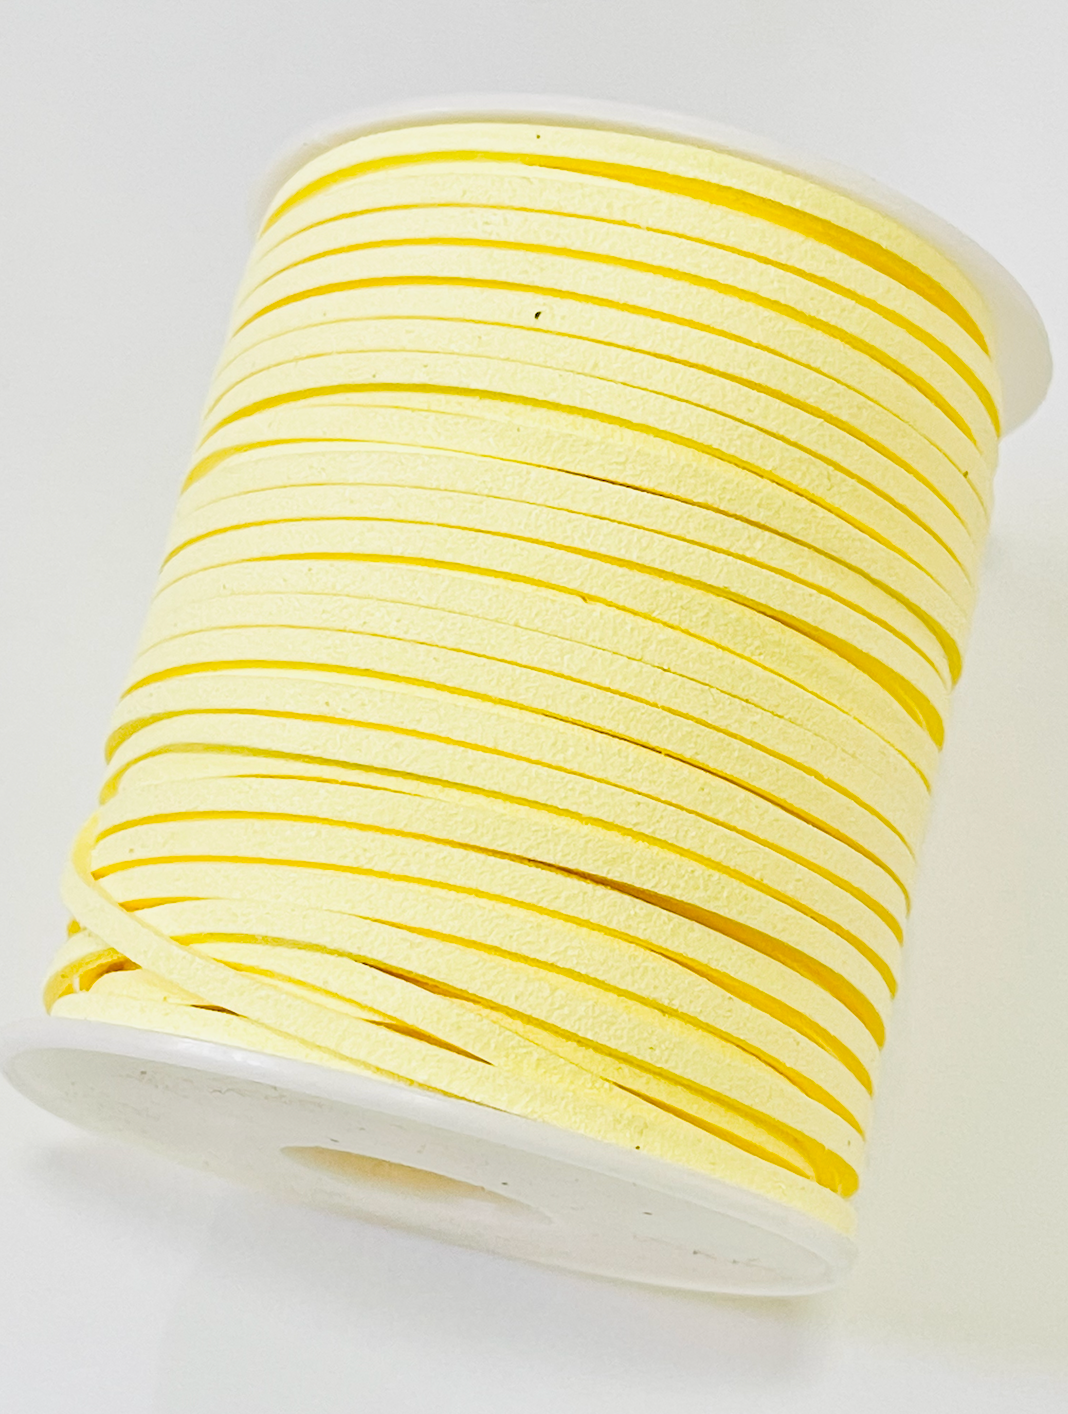 PASTEL Yellow Suede Cord - 5m - Pale Yellow Suede Cord